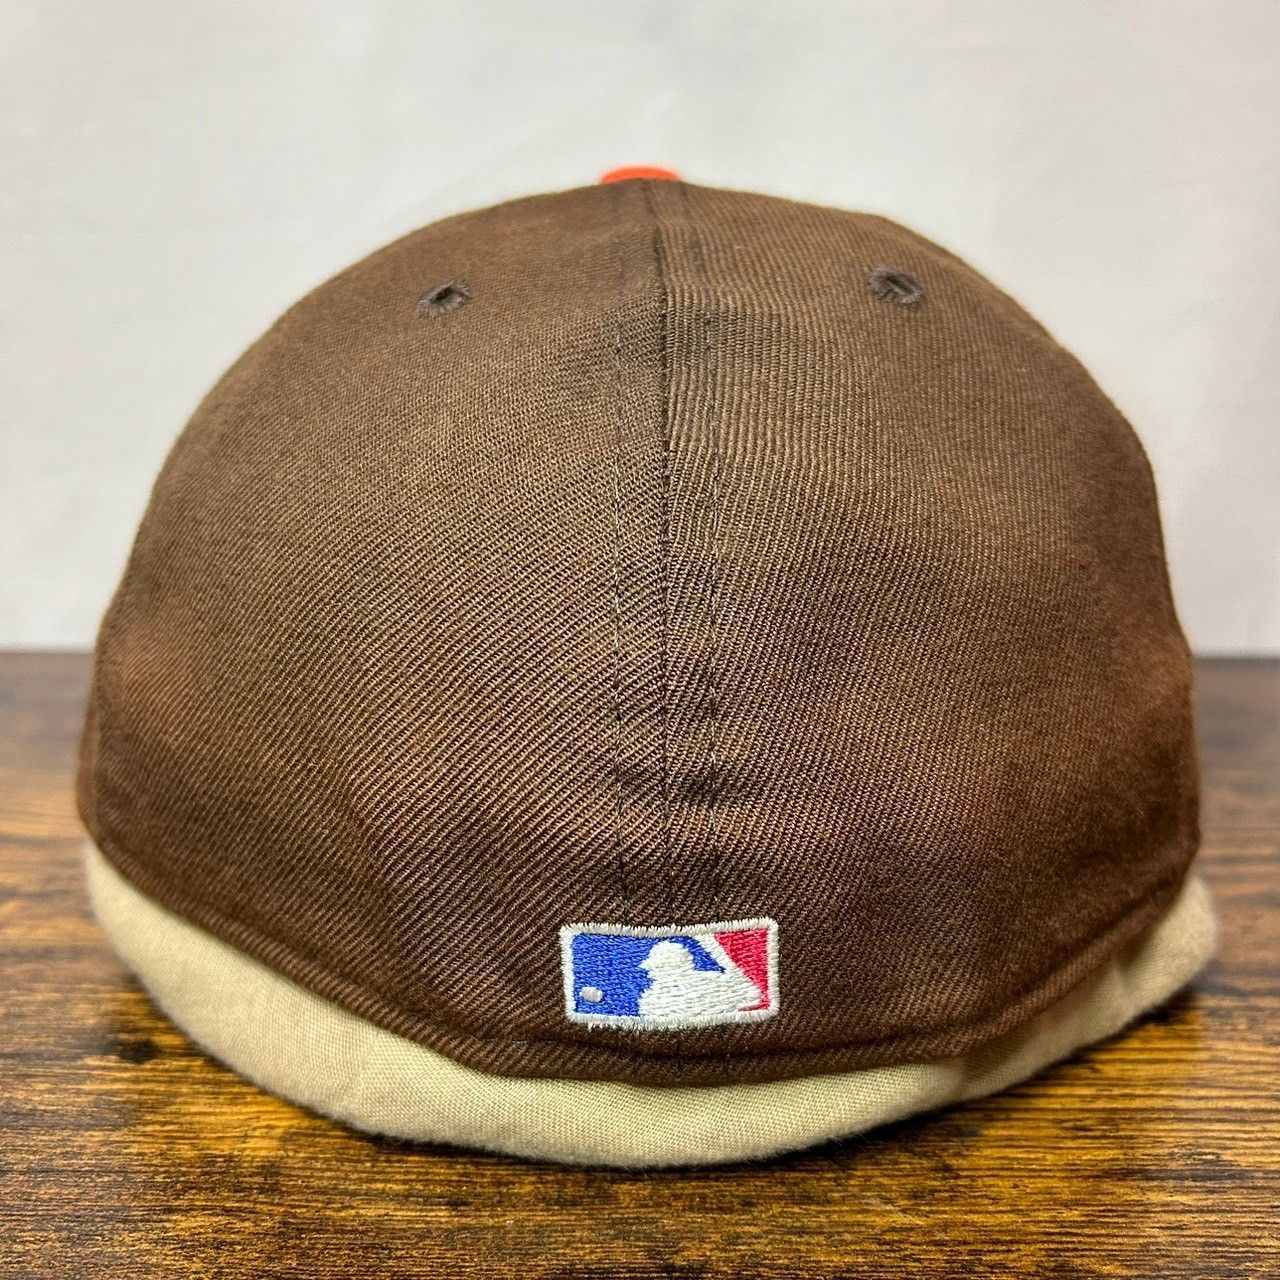 A-85 ニューエラ 59fifty ヤンキース usa製 ヴィンテージ1200